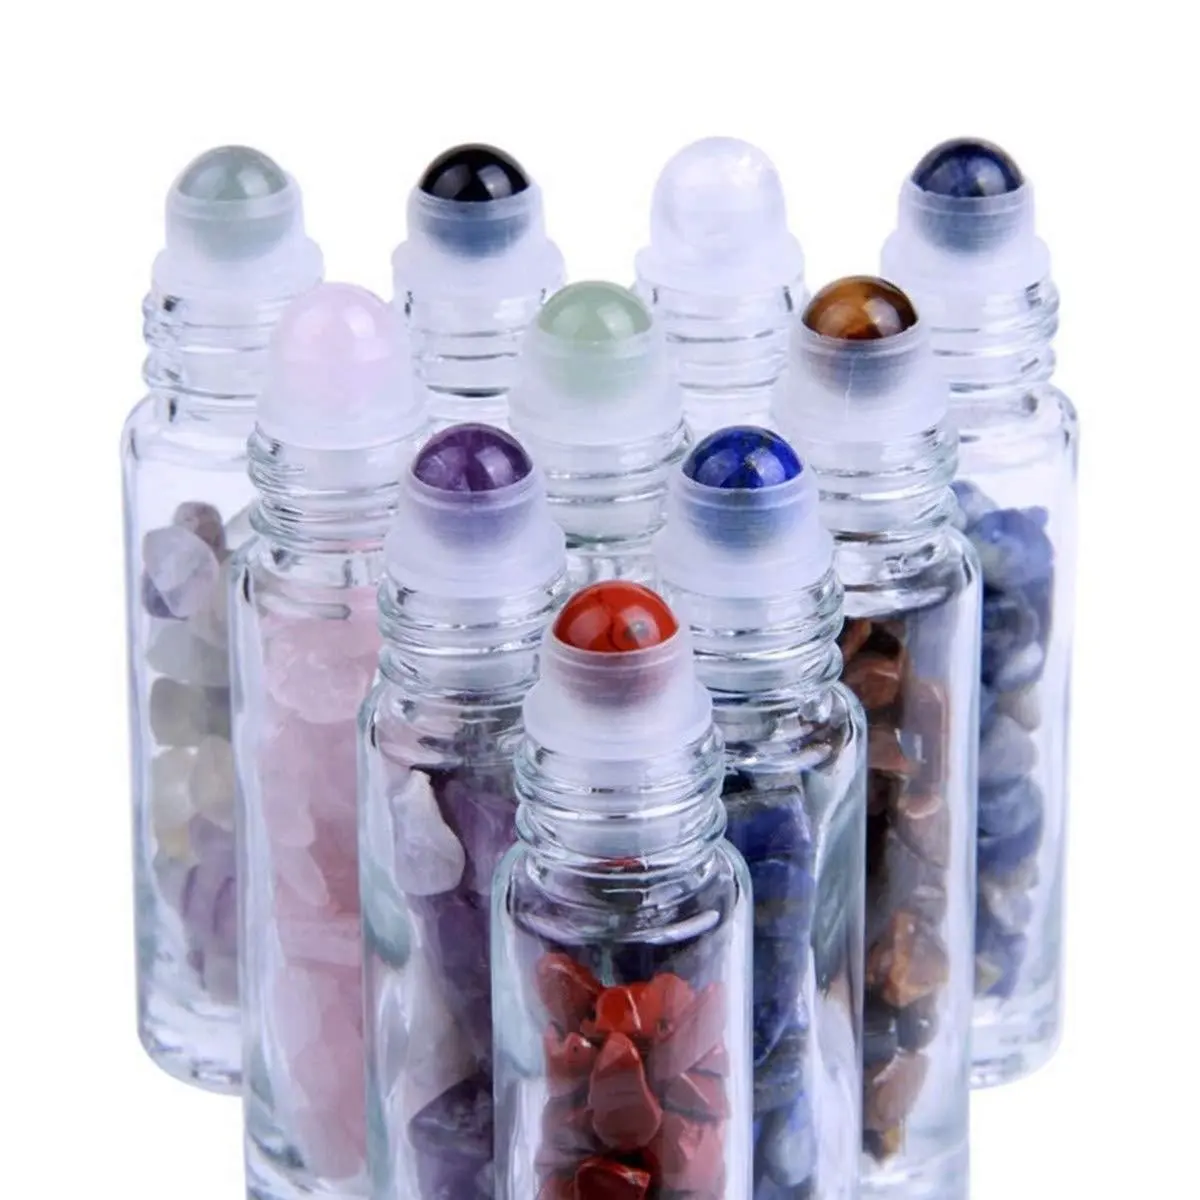 10ml Glass Roller Bottles with Decorative Tops Mini Tumbled Crystals Chips Inside natural gemstone rollers Gemstone Roller Balls